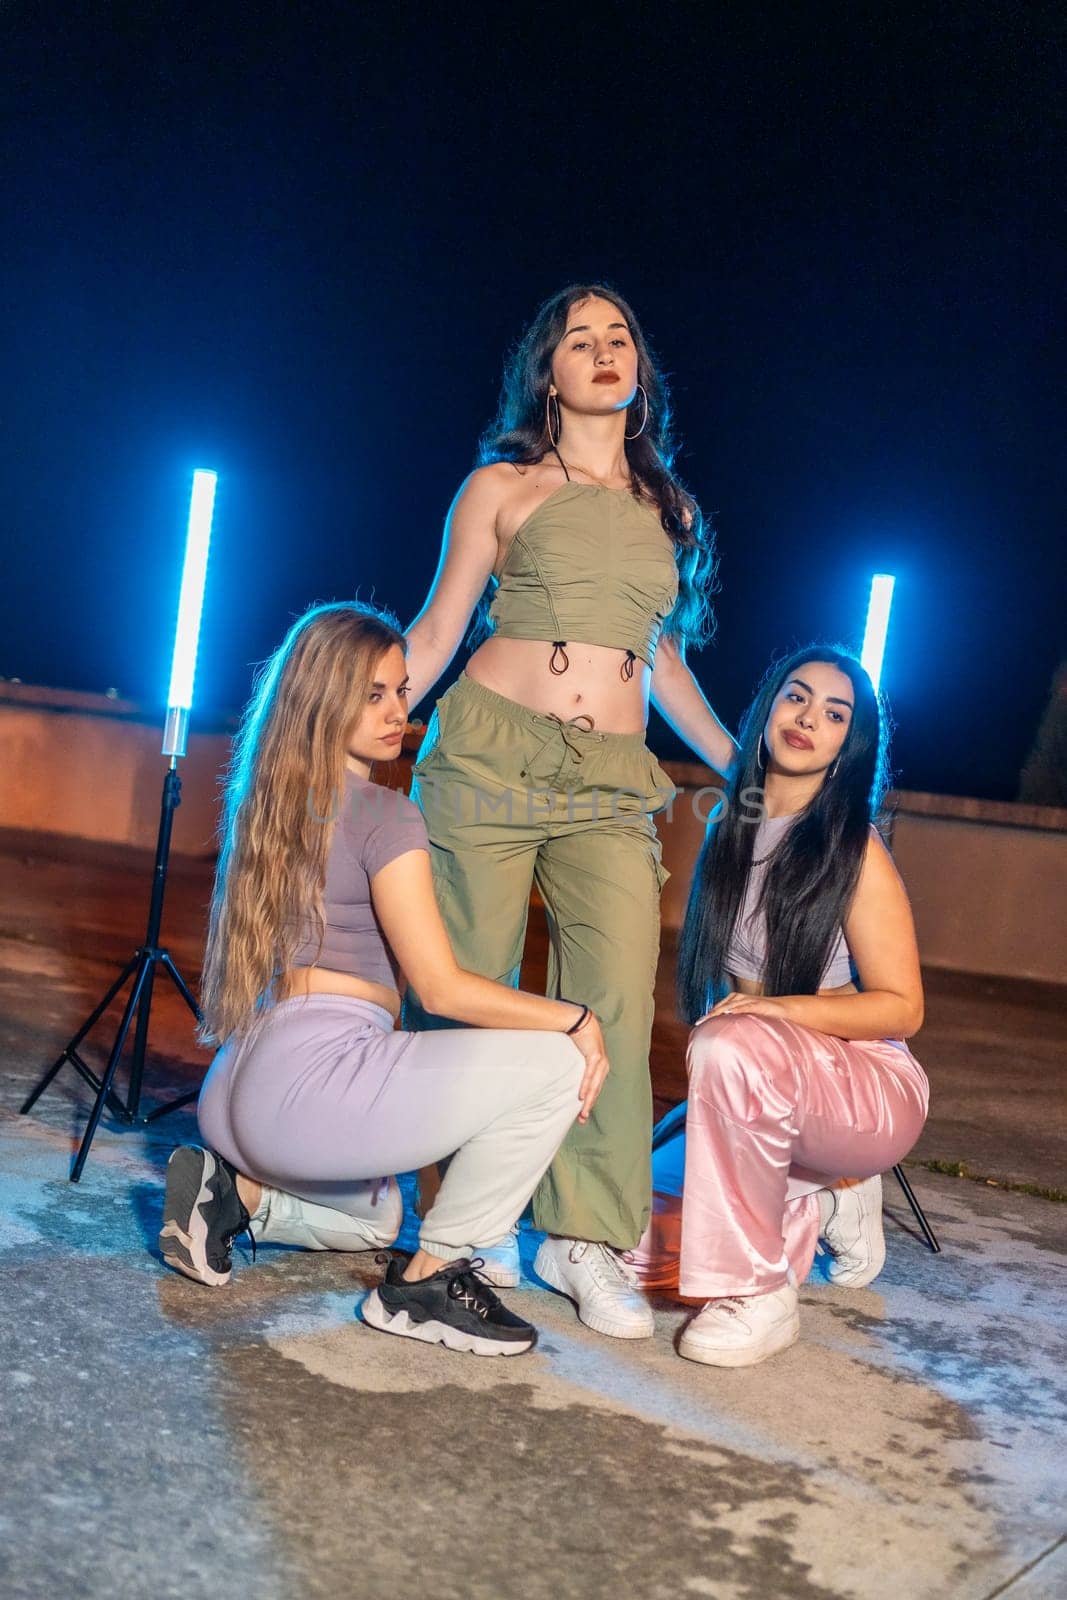 Portrait of three teen trap dancers outdoors at night by Huizi